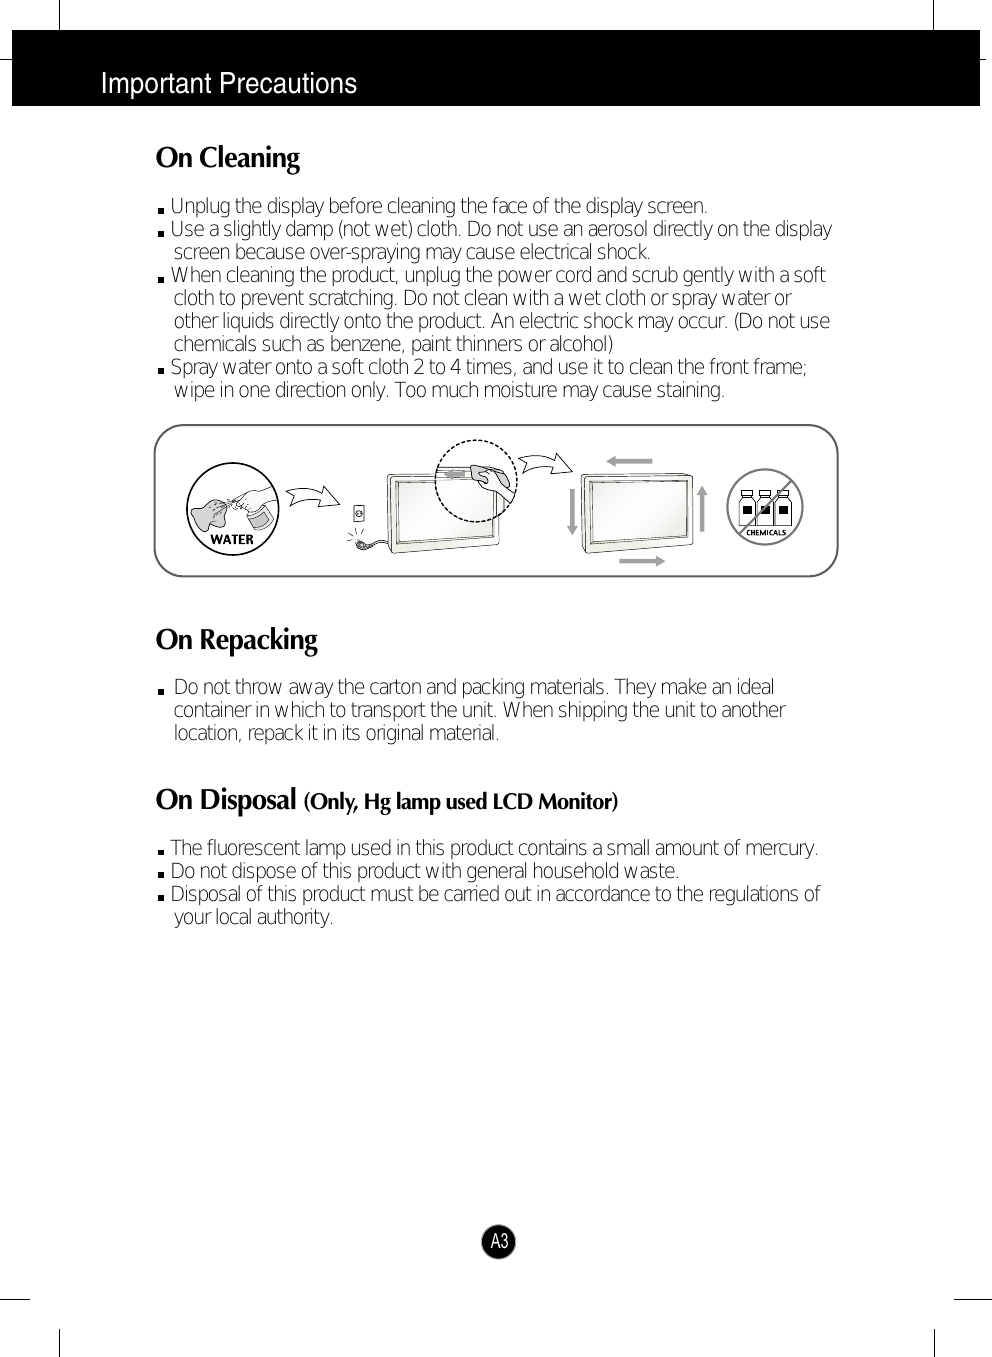 Important PrecautionsA3On CleaningUnplug the display before cleaning the face of the display screen.Use a slightly damp (not wet) cloth. Do not use an aerosol directly on the displayscreen because over-spraying may cause electrical shock.When cleaning the product, unplug the power cord and scrub gently with a softcloth to prevent scratching. Do not clean with a wet cloth or spray water orother liquids directly onto the product. An electric shock may occur. (Do not usechemicals such as benzene, paint thinners or alcohol) Spray water onto a soft cloth 2 to 4 times, and use it to clean the front frame;wipe in one direction only. Too much moisture may cause staining.  On RepackingDo not throw away the carton and packing materials. They make an idealcontainer in which to transport the unit. When shipping the unit to anotherlocation, repack it in its original material.On Disposal (Only, Hg lamp used LCD Monitor)The fluorescent lamp used in this product contains a small amount of mercury.Do not dispose of this product with general household waste.Disposal of this product must be carried out in accordance to the regulations ofyour local authority.